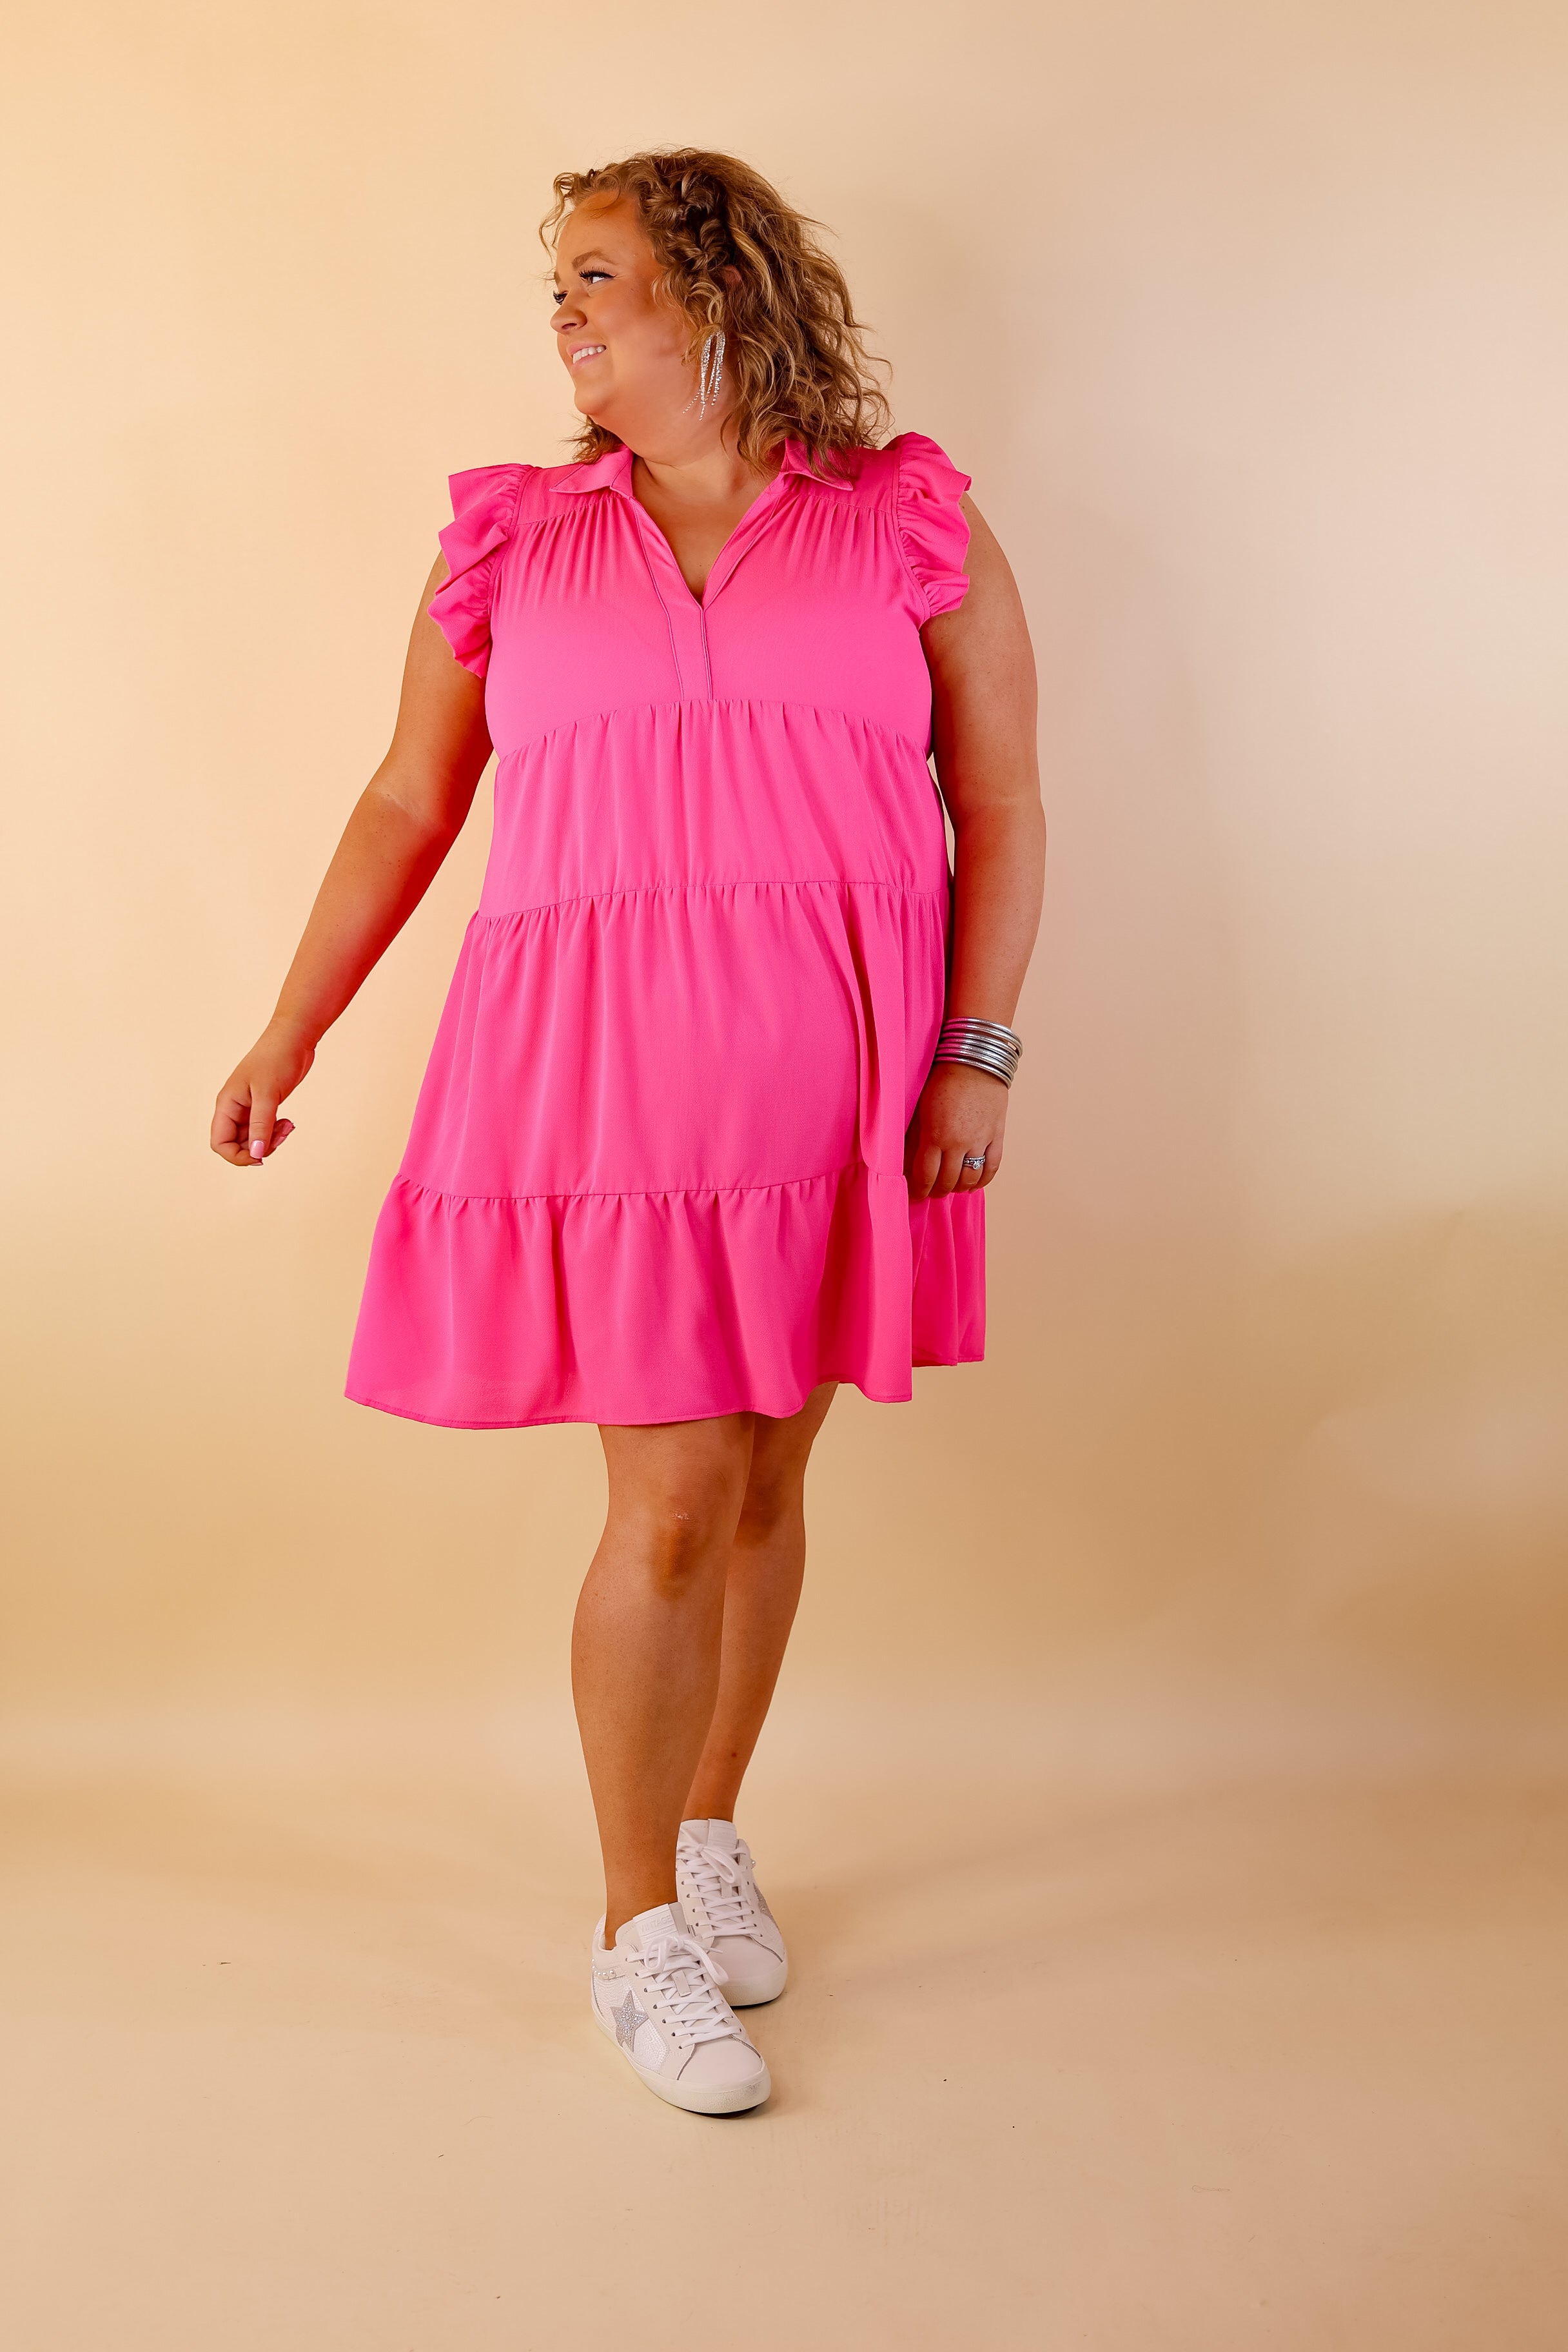 All Of A Sudden Ruffle Cap Sleeve Short Dress in Hot Pink - Giddy Up Glamour Boutique